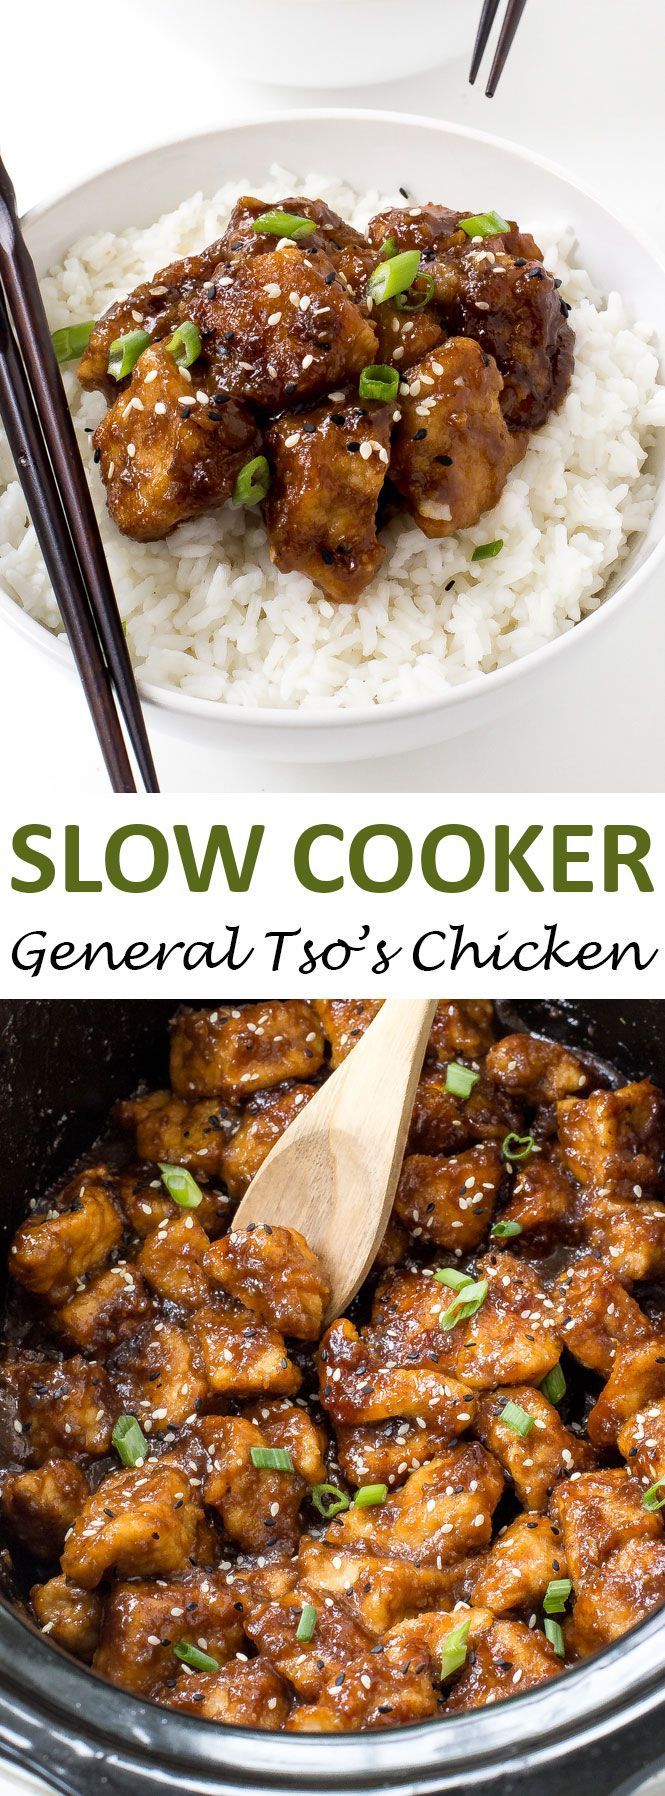 Super Easy Slow Cooker General Tsos Chicken. Way better (and healthier) than takeo